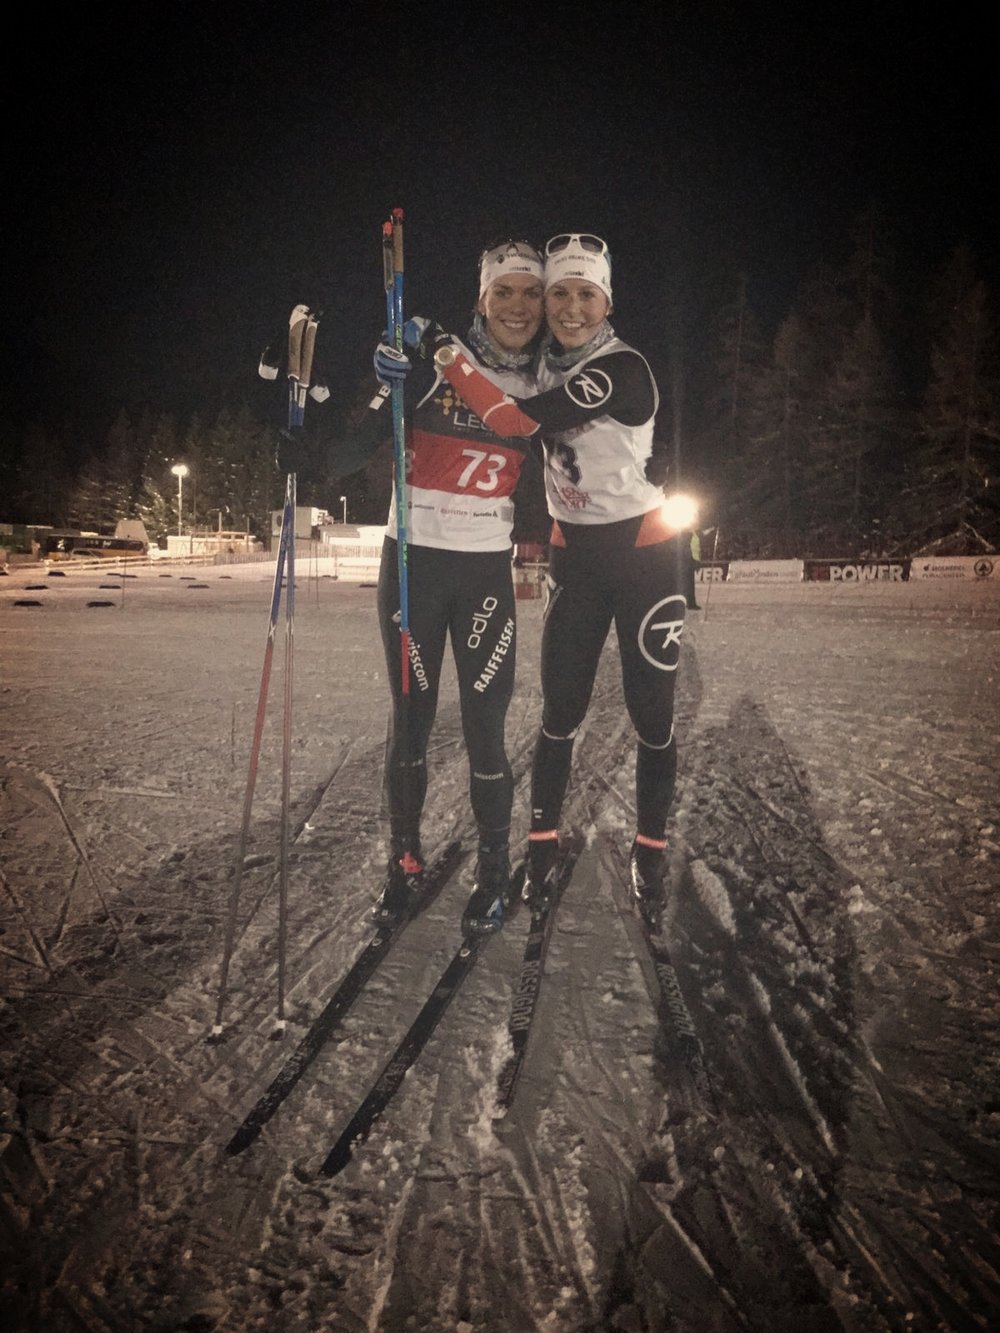  Tatjana Stiffler and I taking home the win at the Bündner Meisterschaft - a bit of a different competition field than the Toblach World Cup Team Sprint.... ;)&nbsp; 